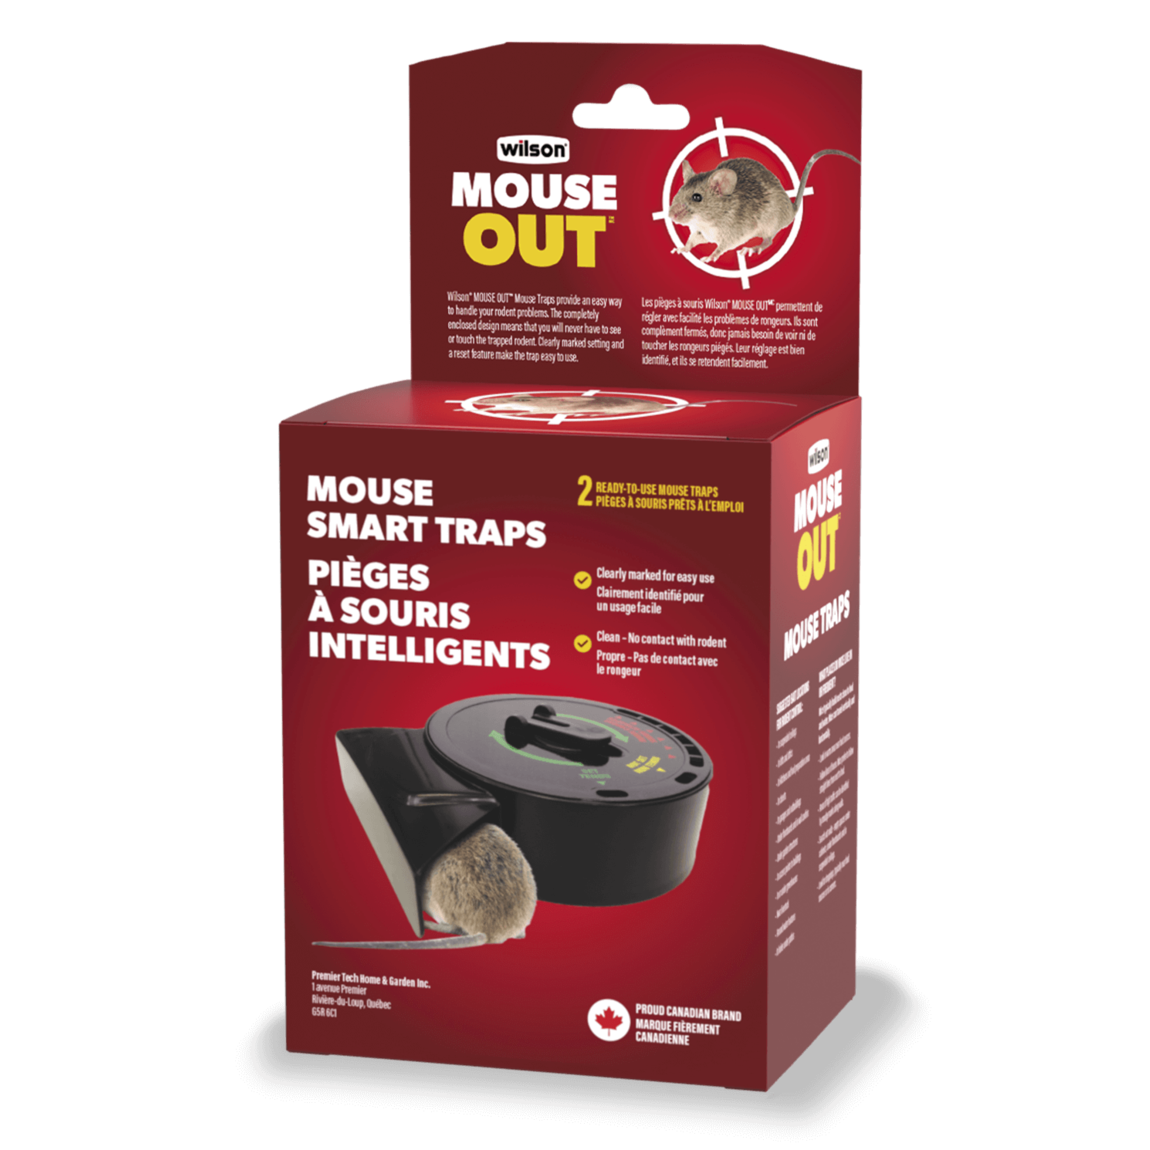 https://www.wilsoncontrol.com/sites/ptgc_wilson/files/styles/swiper_gallery_image/public/2022-01/wilson-mouse-out-mouse-smart-traps-2trap.png?itok=5MVSaKOv